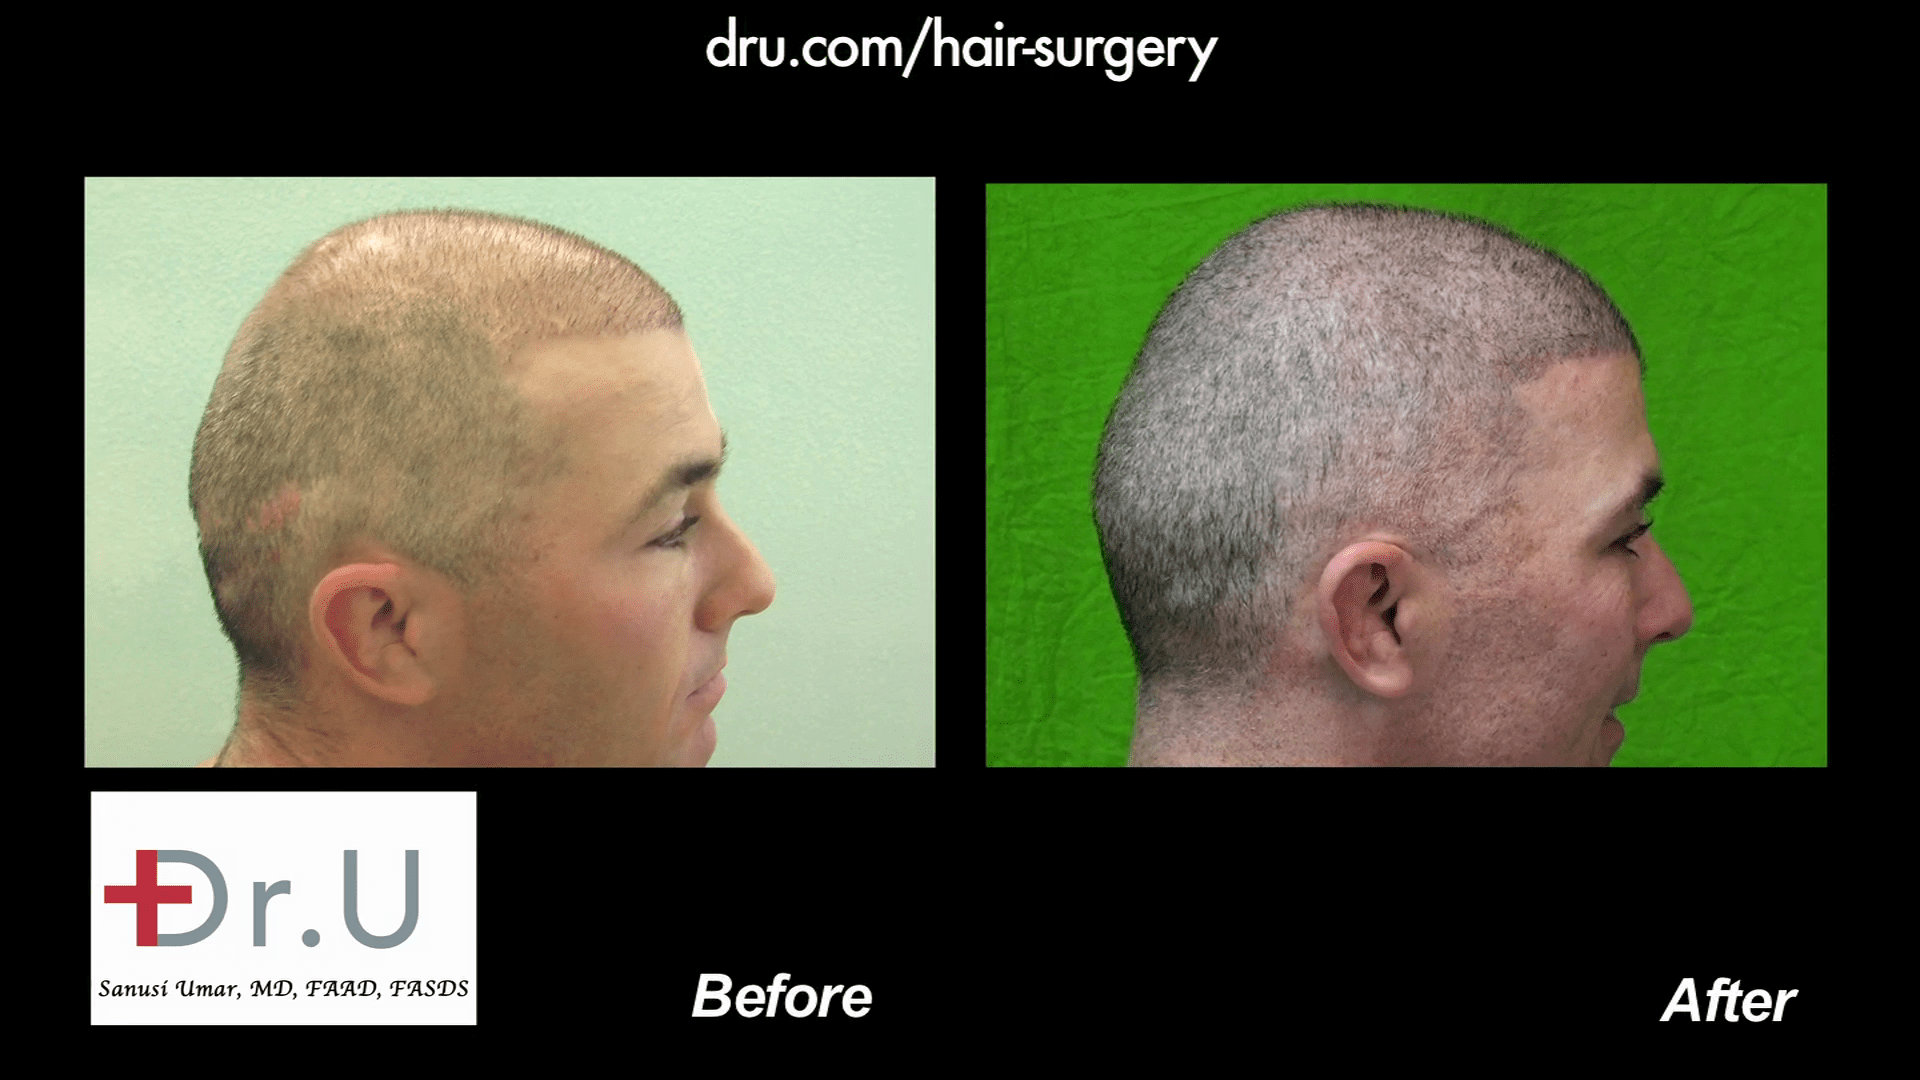 Video: Body Hair Transplantation Restores NW6 Thinning for a Buzz Cut